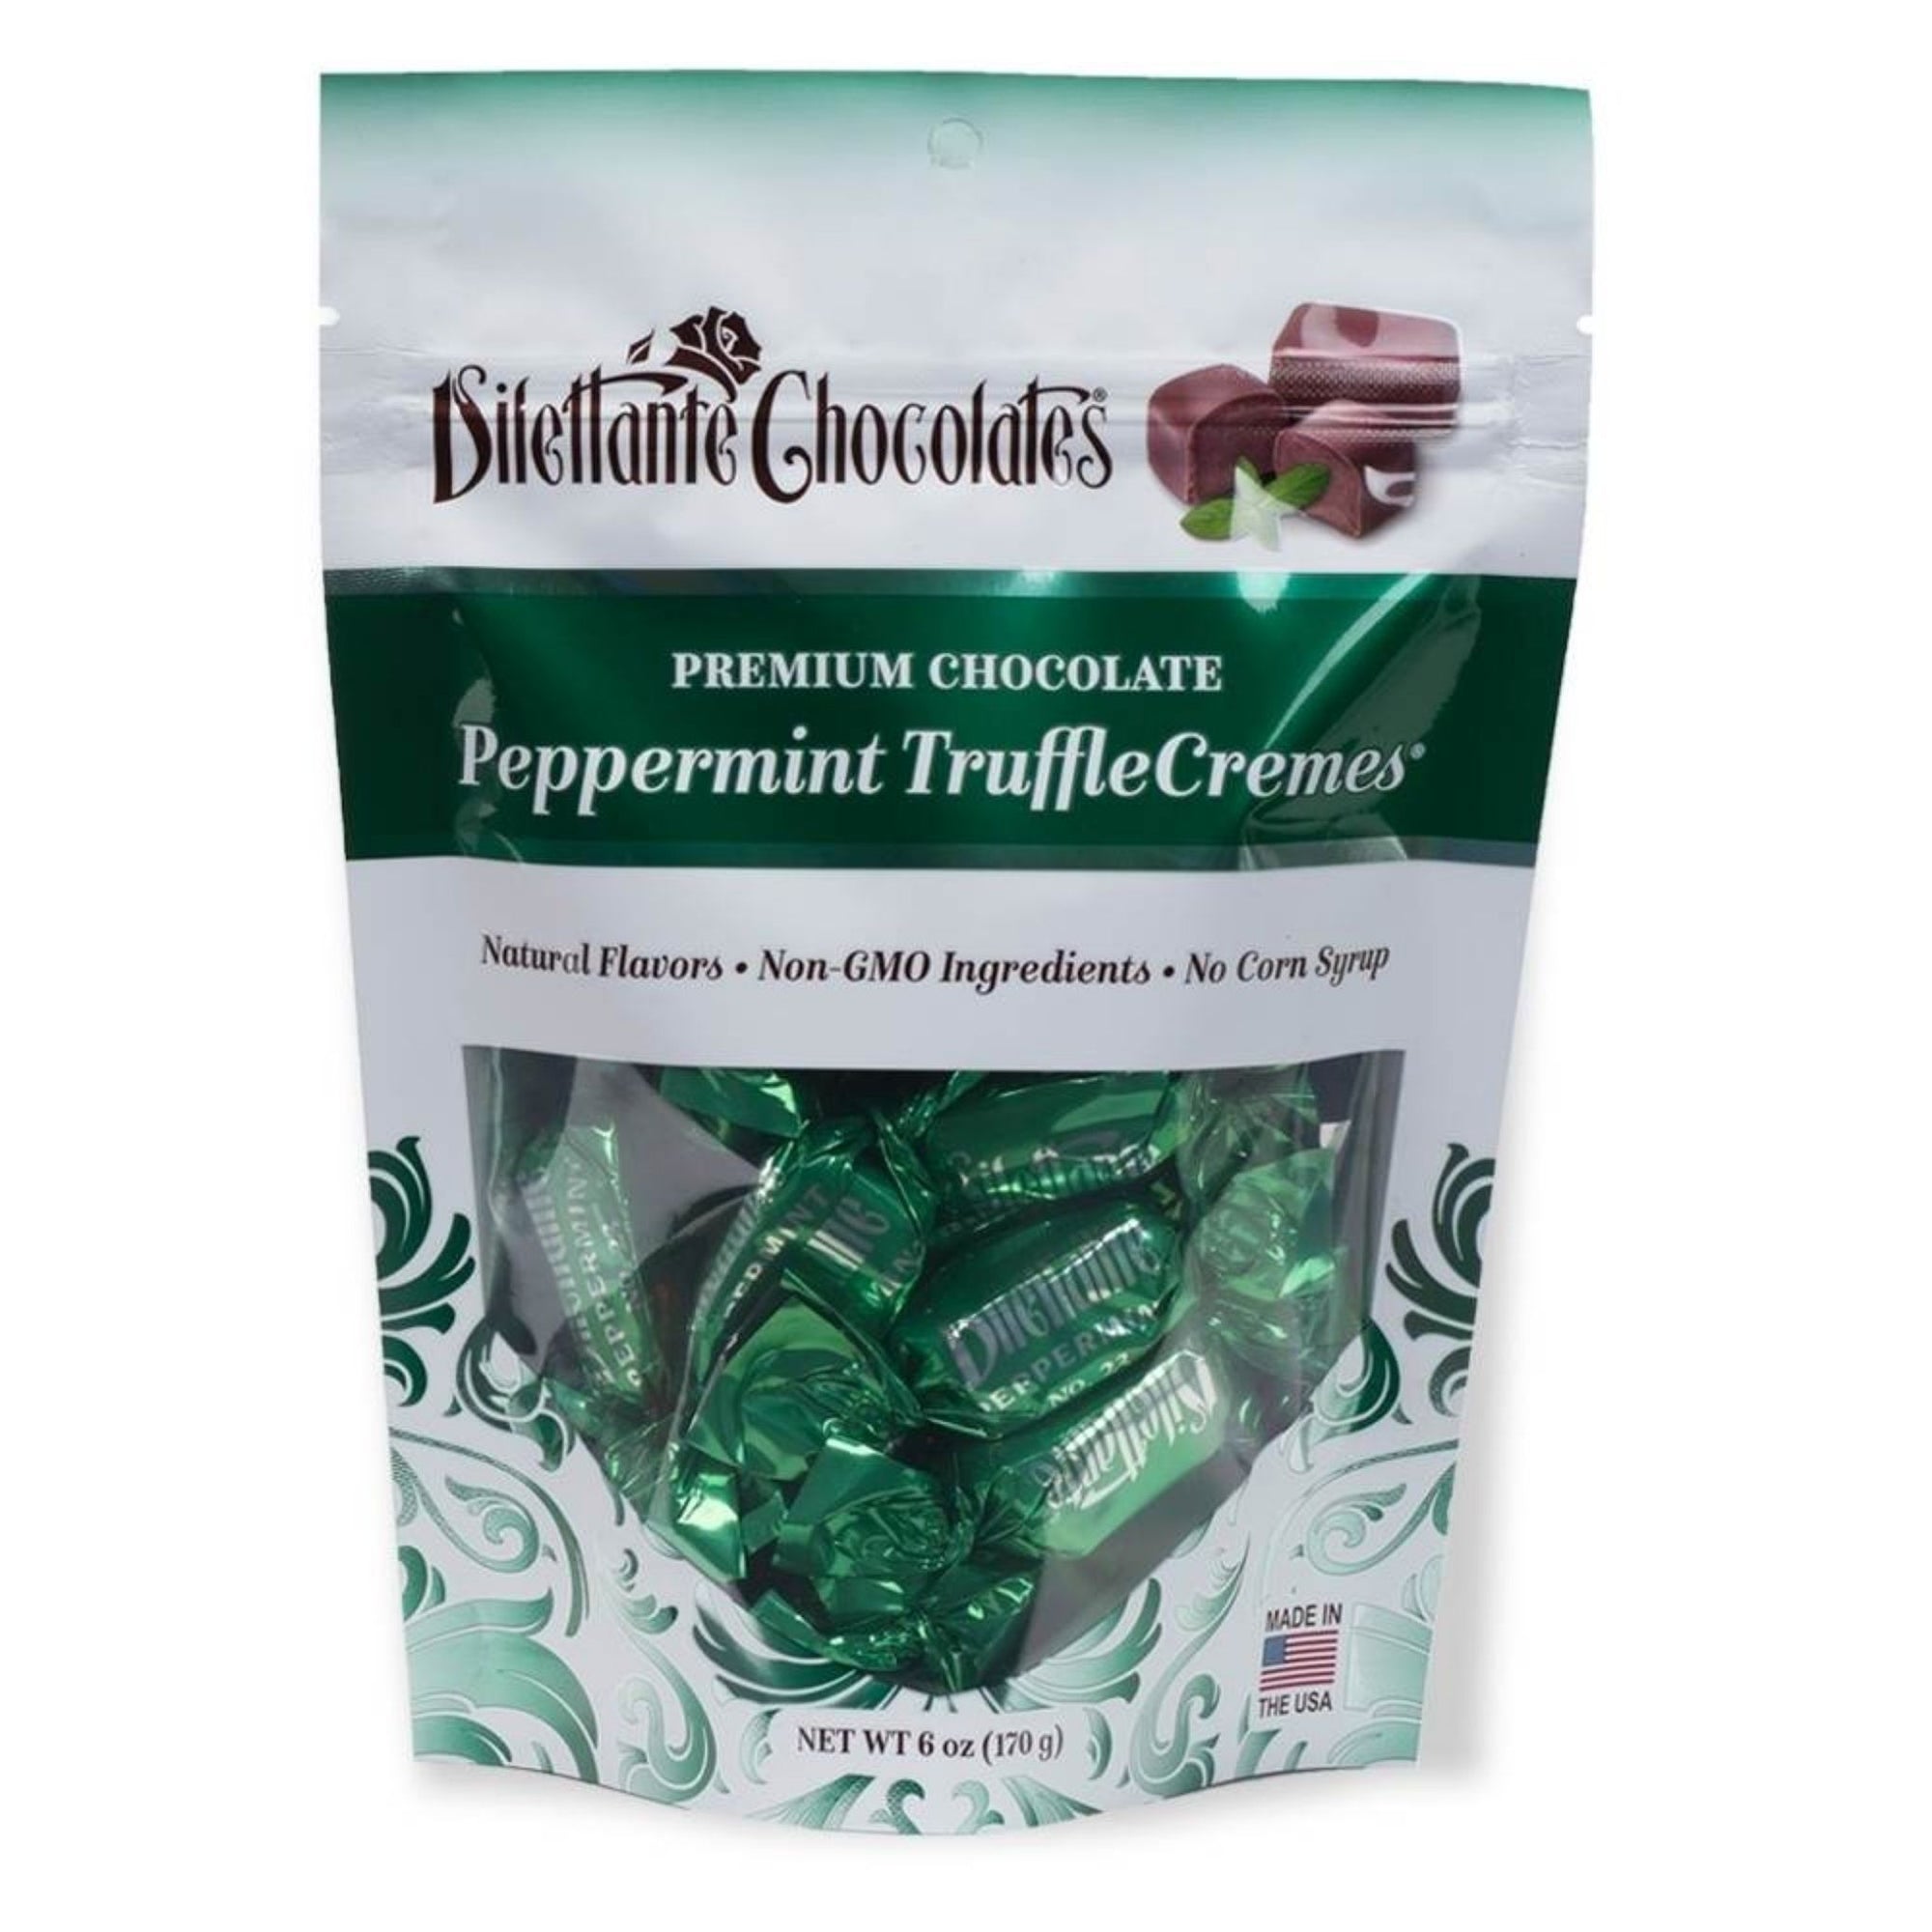 Dilettante Chocolates Premium Chocolate Peppermint TruffleCremes Featuring Natural Flavors, Non-GMO Ingredients, and 0 Corn Syrup